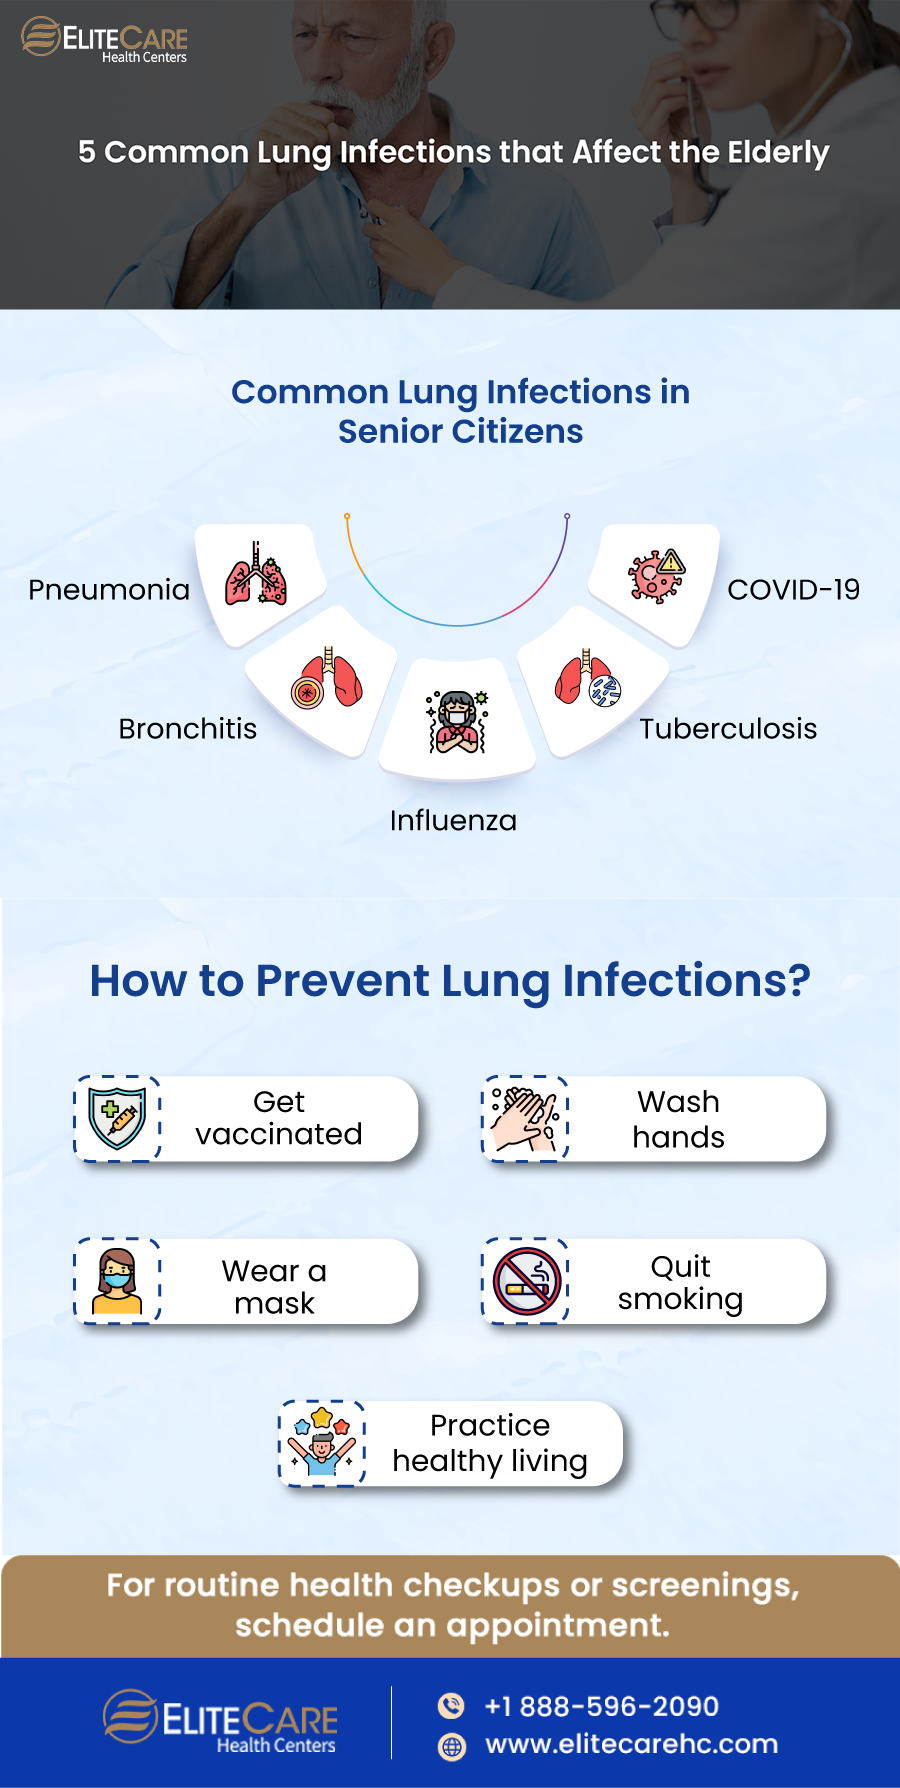 5 Common Lung Infections that Affect the Elderly | Infographic